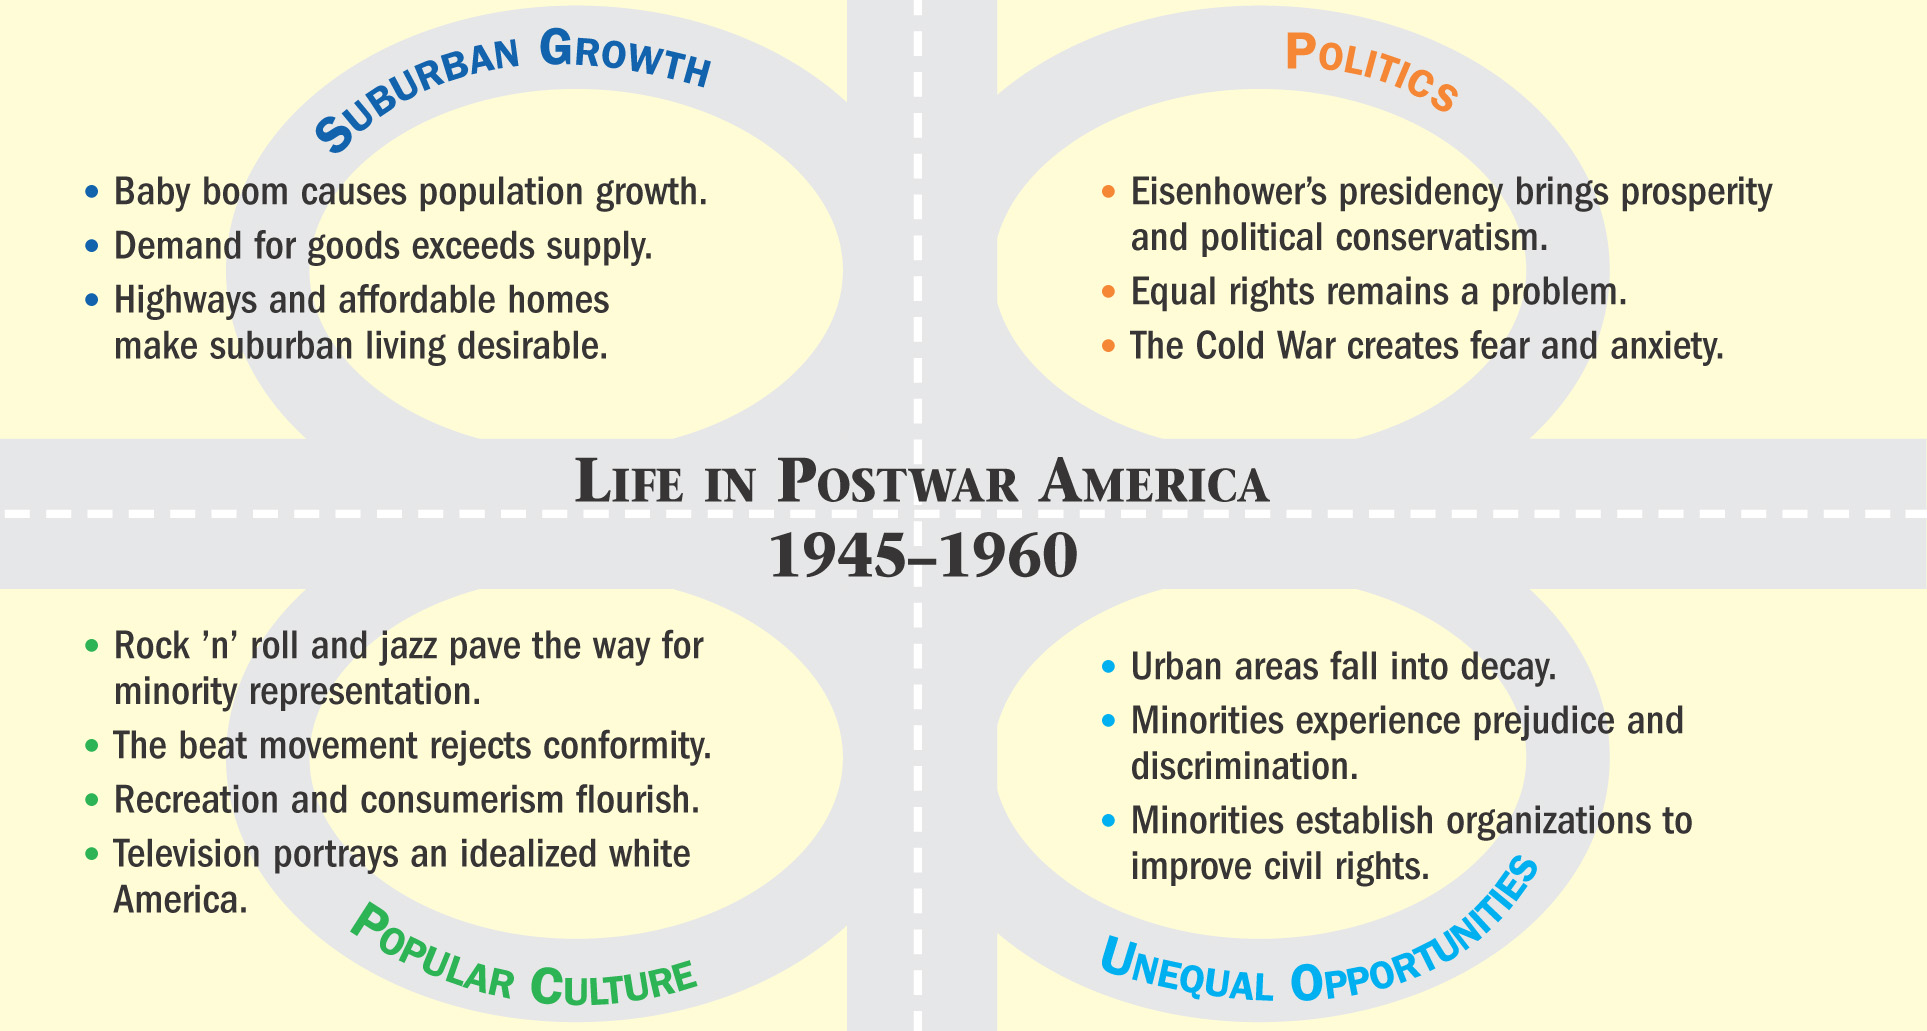 Diagram lists four aspects of Life in Postwar America 1945 - 1960: suburban growth, politics, popular culture, and unequal opportunities